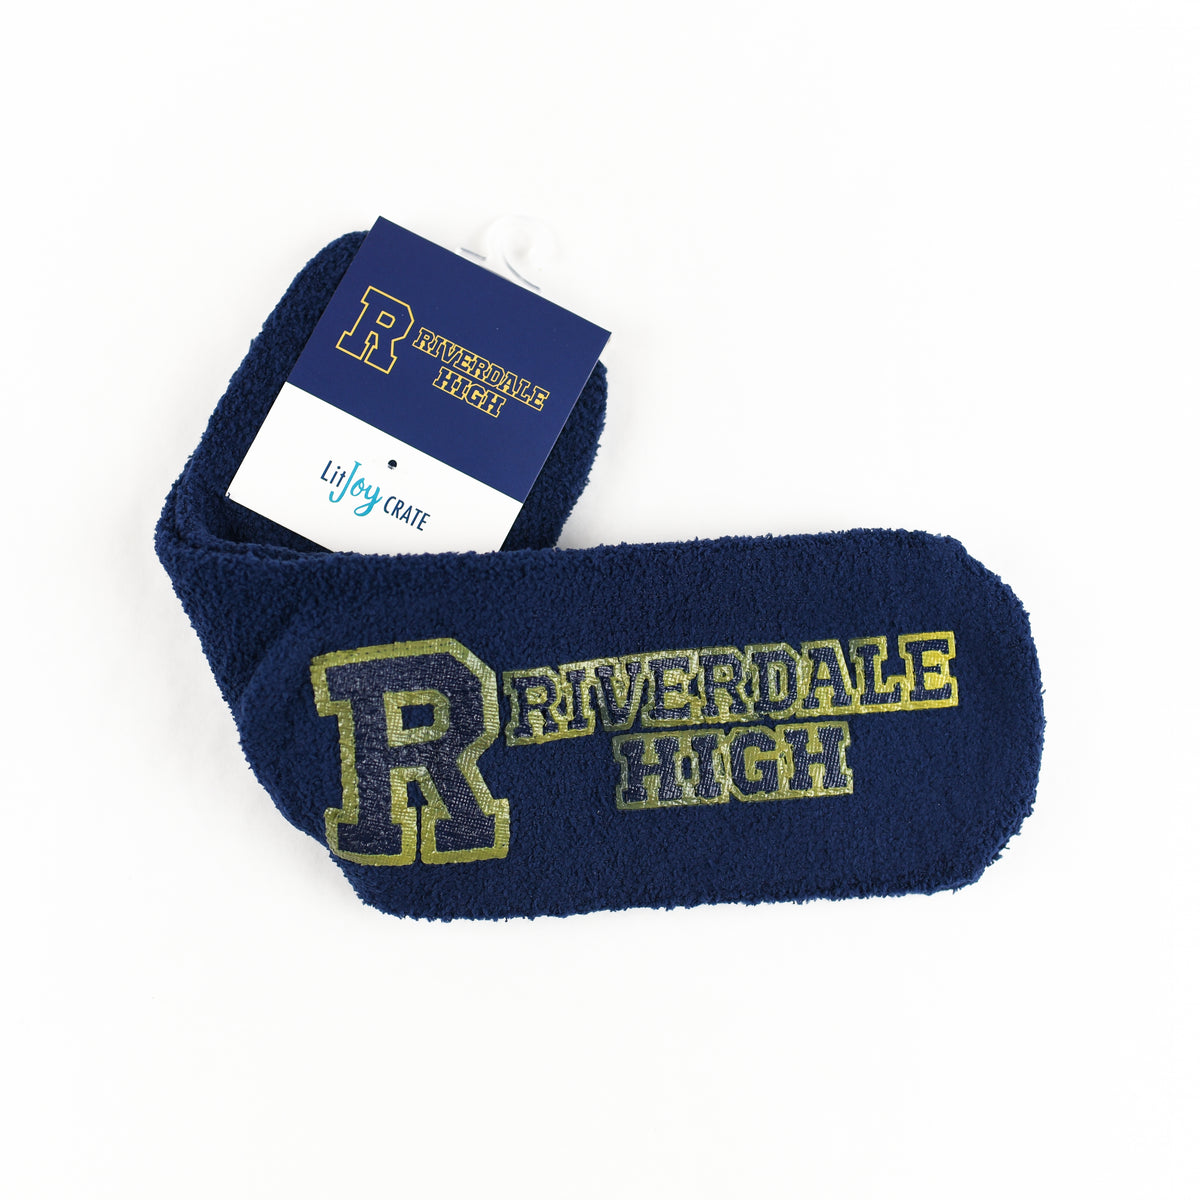 Riverdale Fuzzy Socks are dark blue with gold writing on the bottom of &quot;Riverdale High&quot;